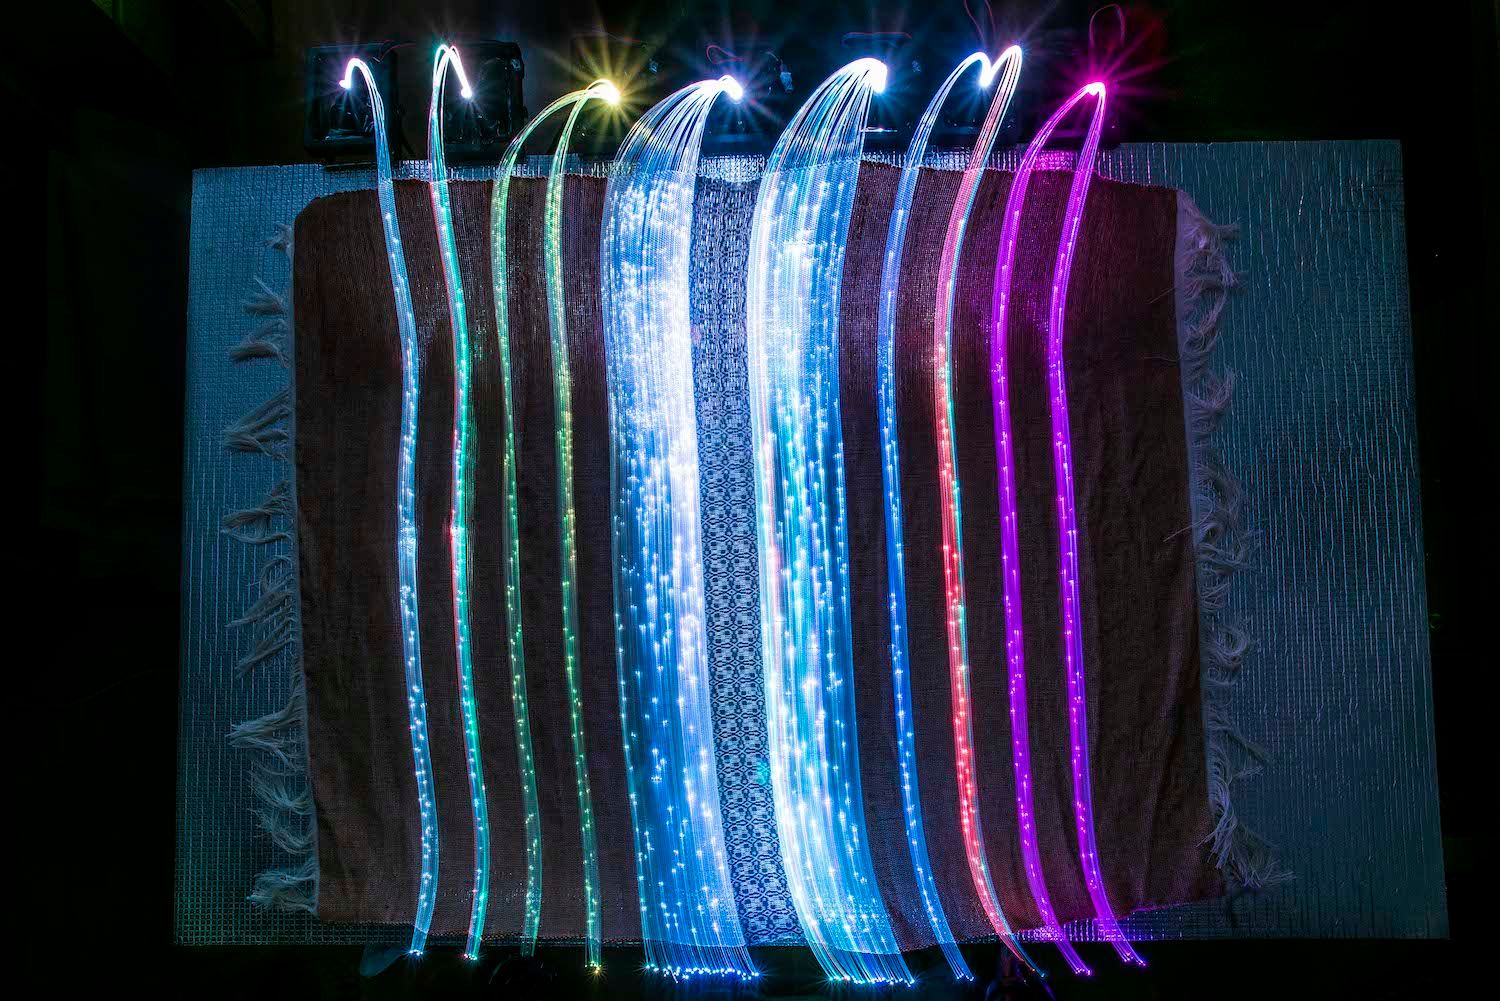 Textile of night lights woven with optical fibers | MetropoLight